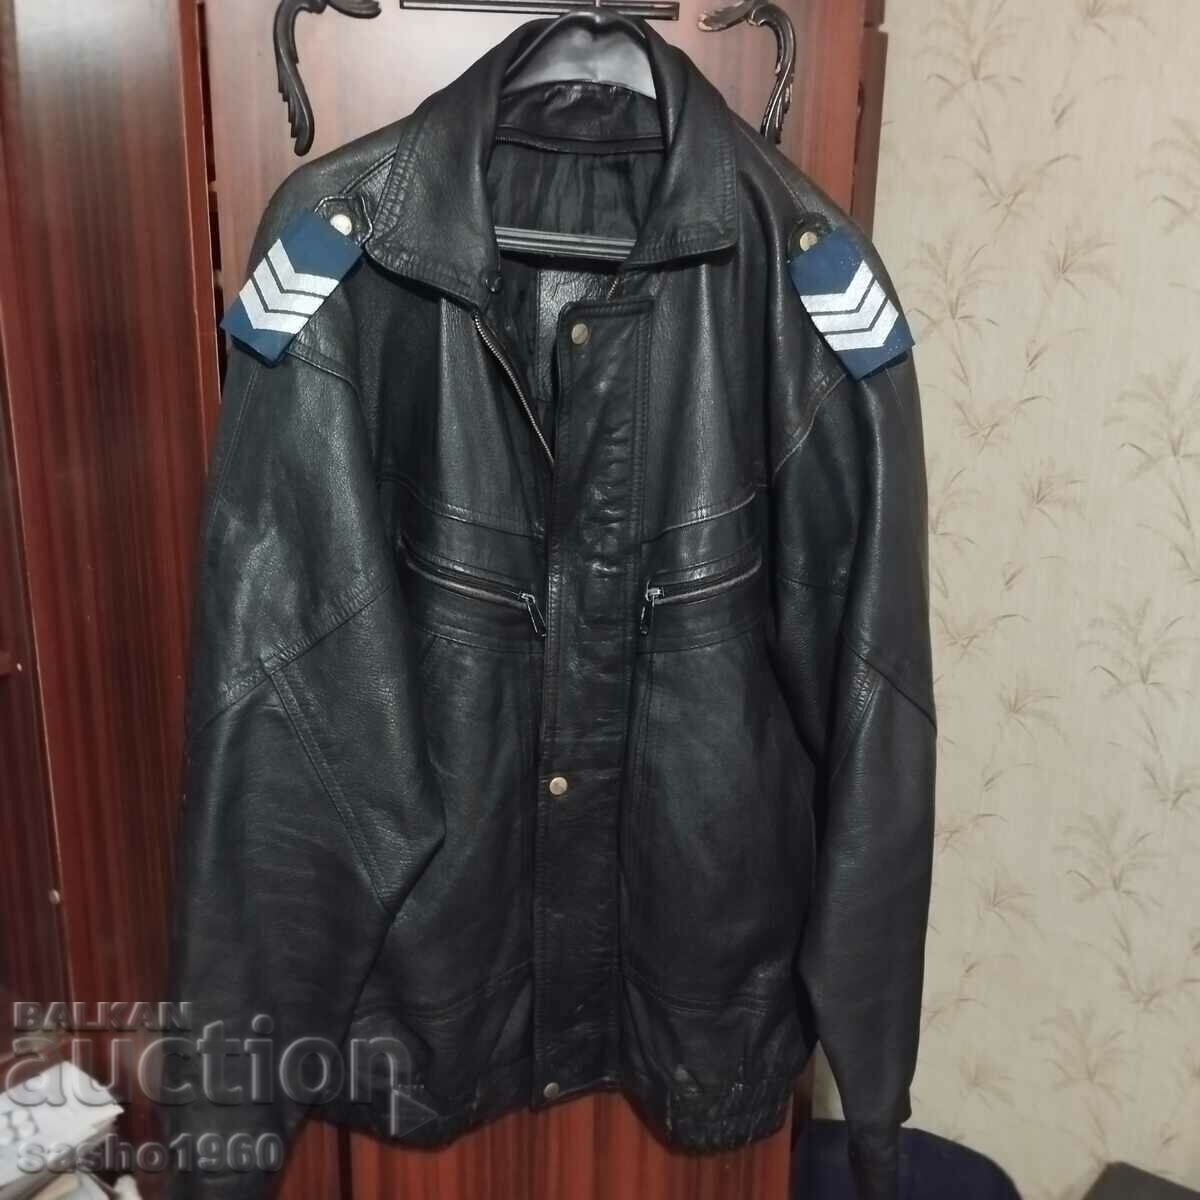 Retro leather jacket MIA chief sergeant from the 90s